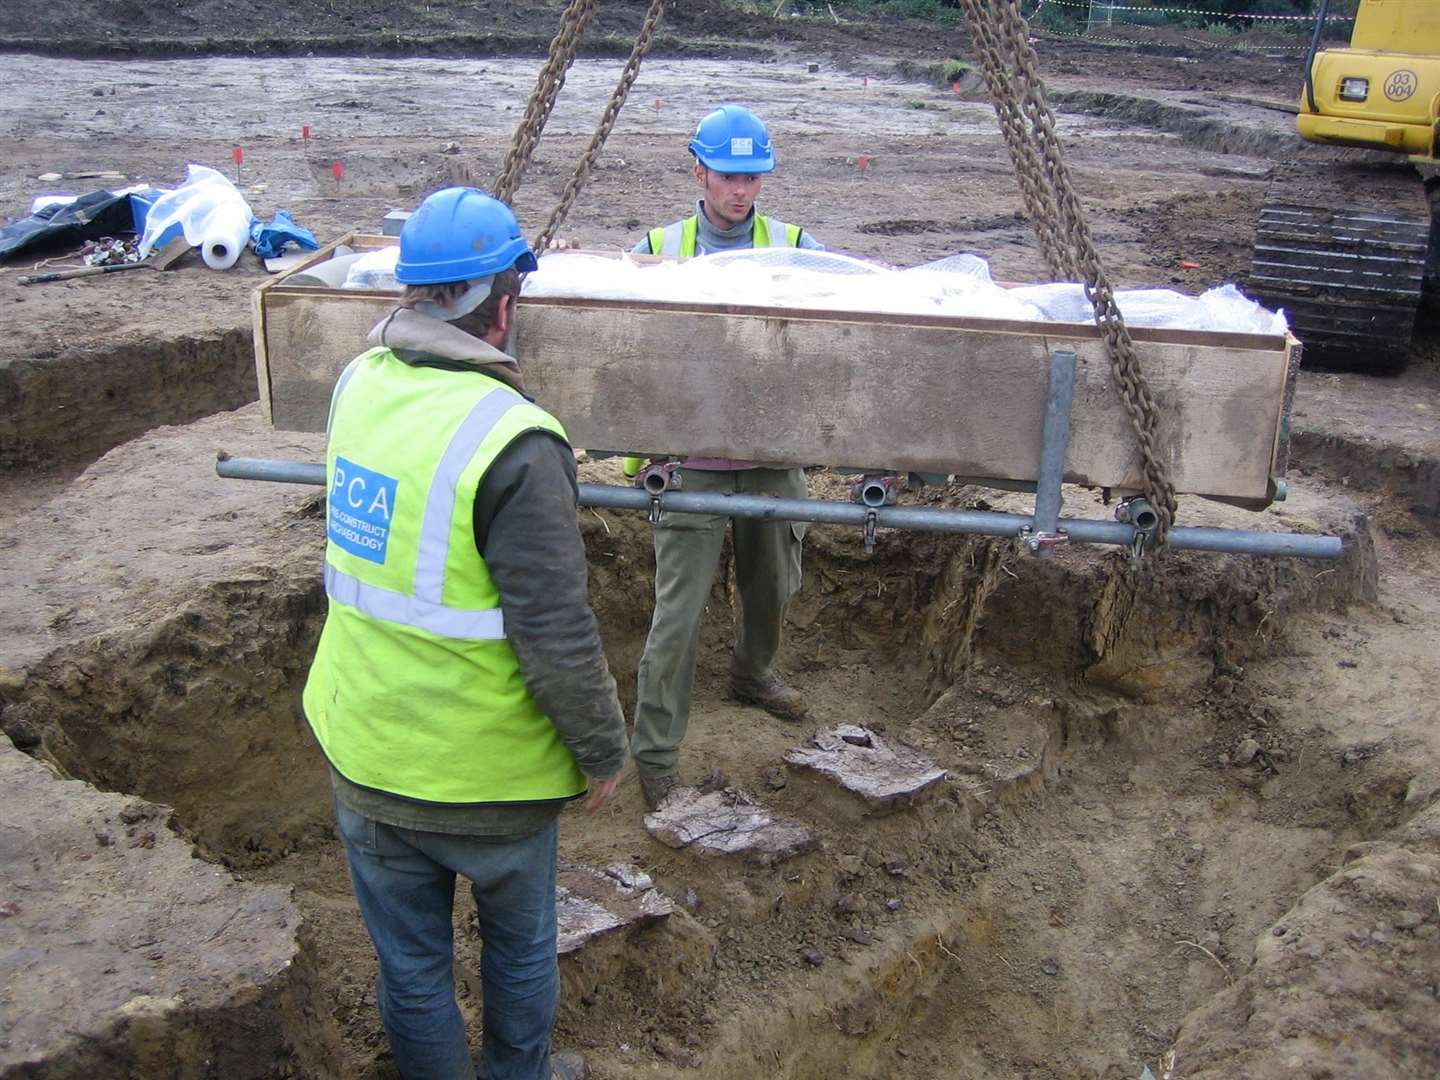 Site-supervisor Guy Seddon (right) oversees the coffin being lifted from the mausoleum. Image from Pre-Constuct Archaeology